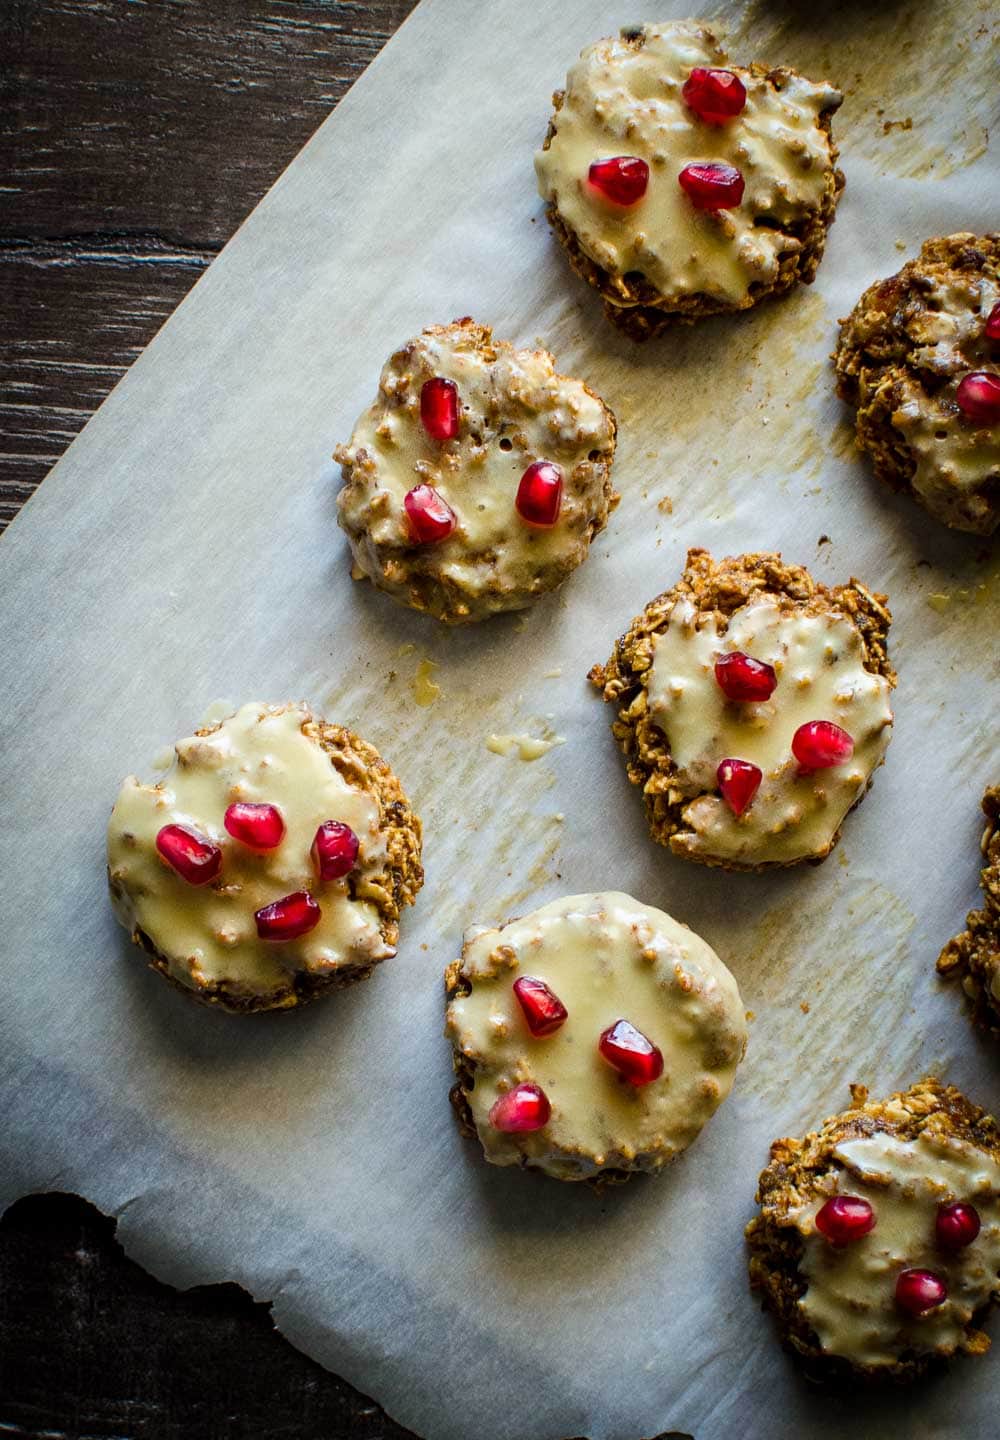 Gingerbread Energy Bites are made with Siggi's yogurt, naturally sweetened, and full of fiber and protein to keep you going during the busy holidays!